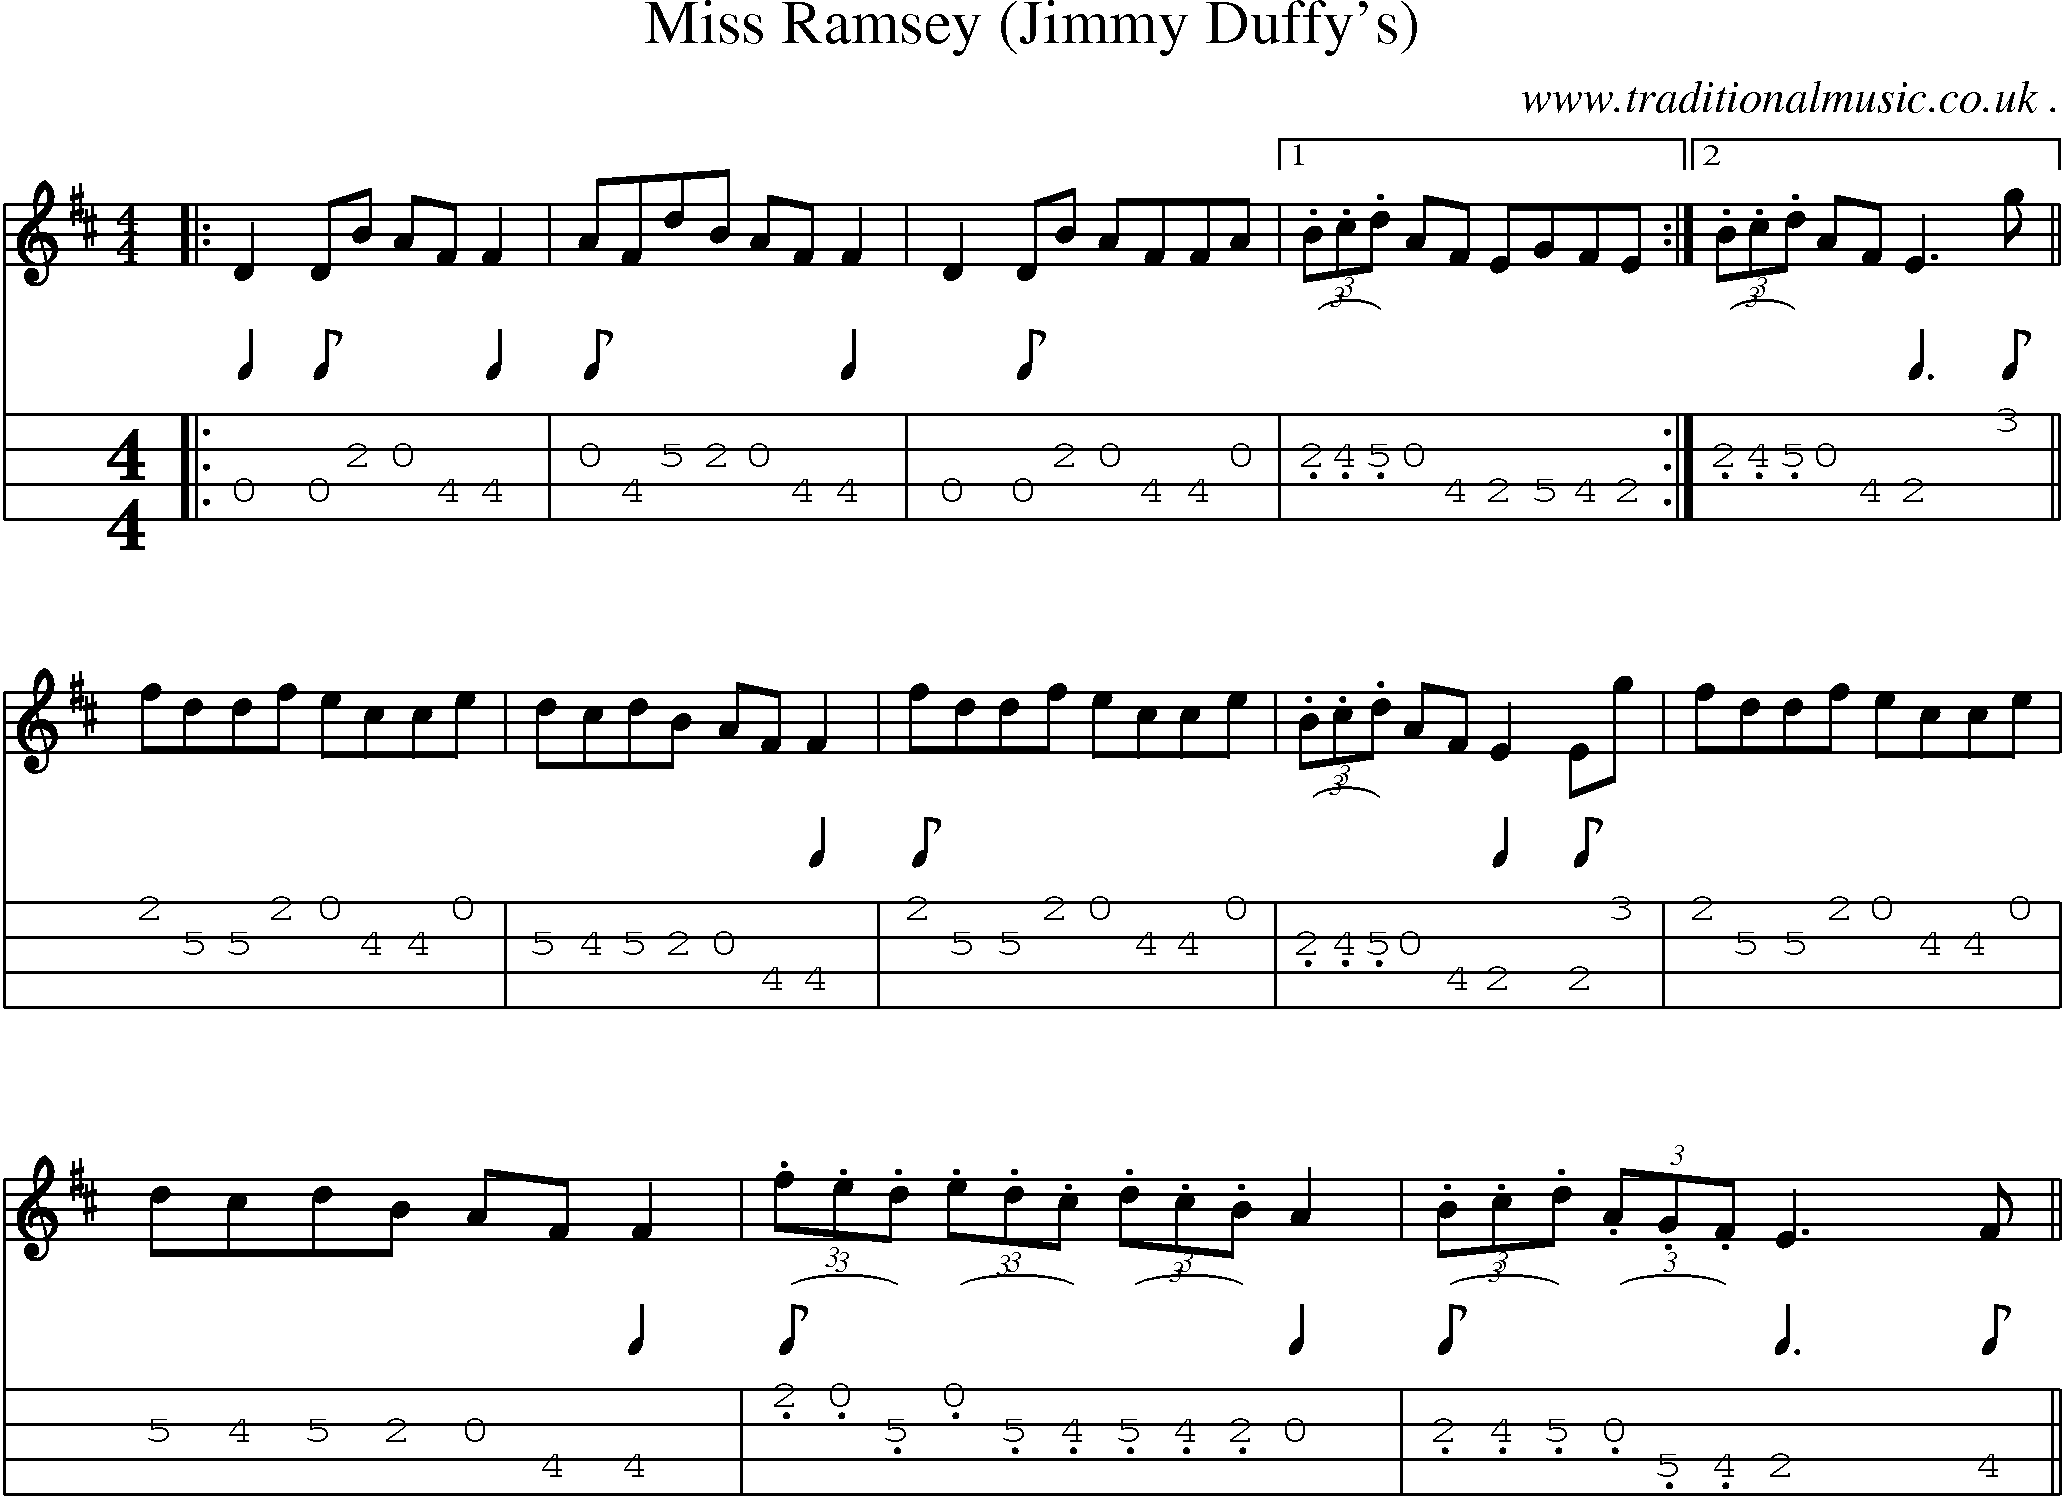 Sheet-Music and Mandolin Tabs for Miss Ramsey (jimmy Duffys)